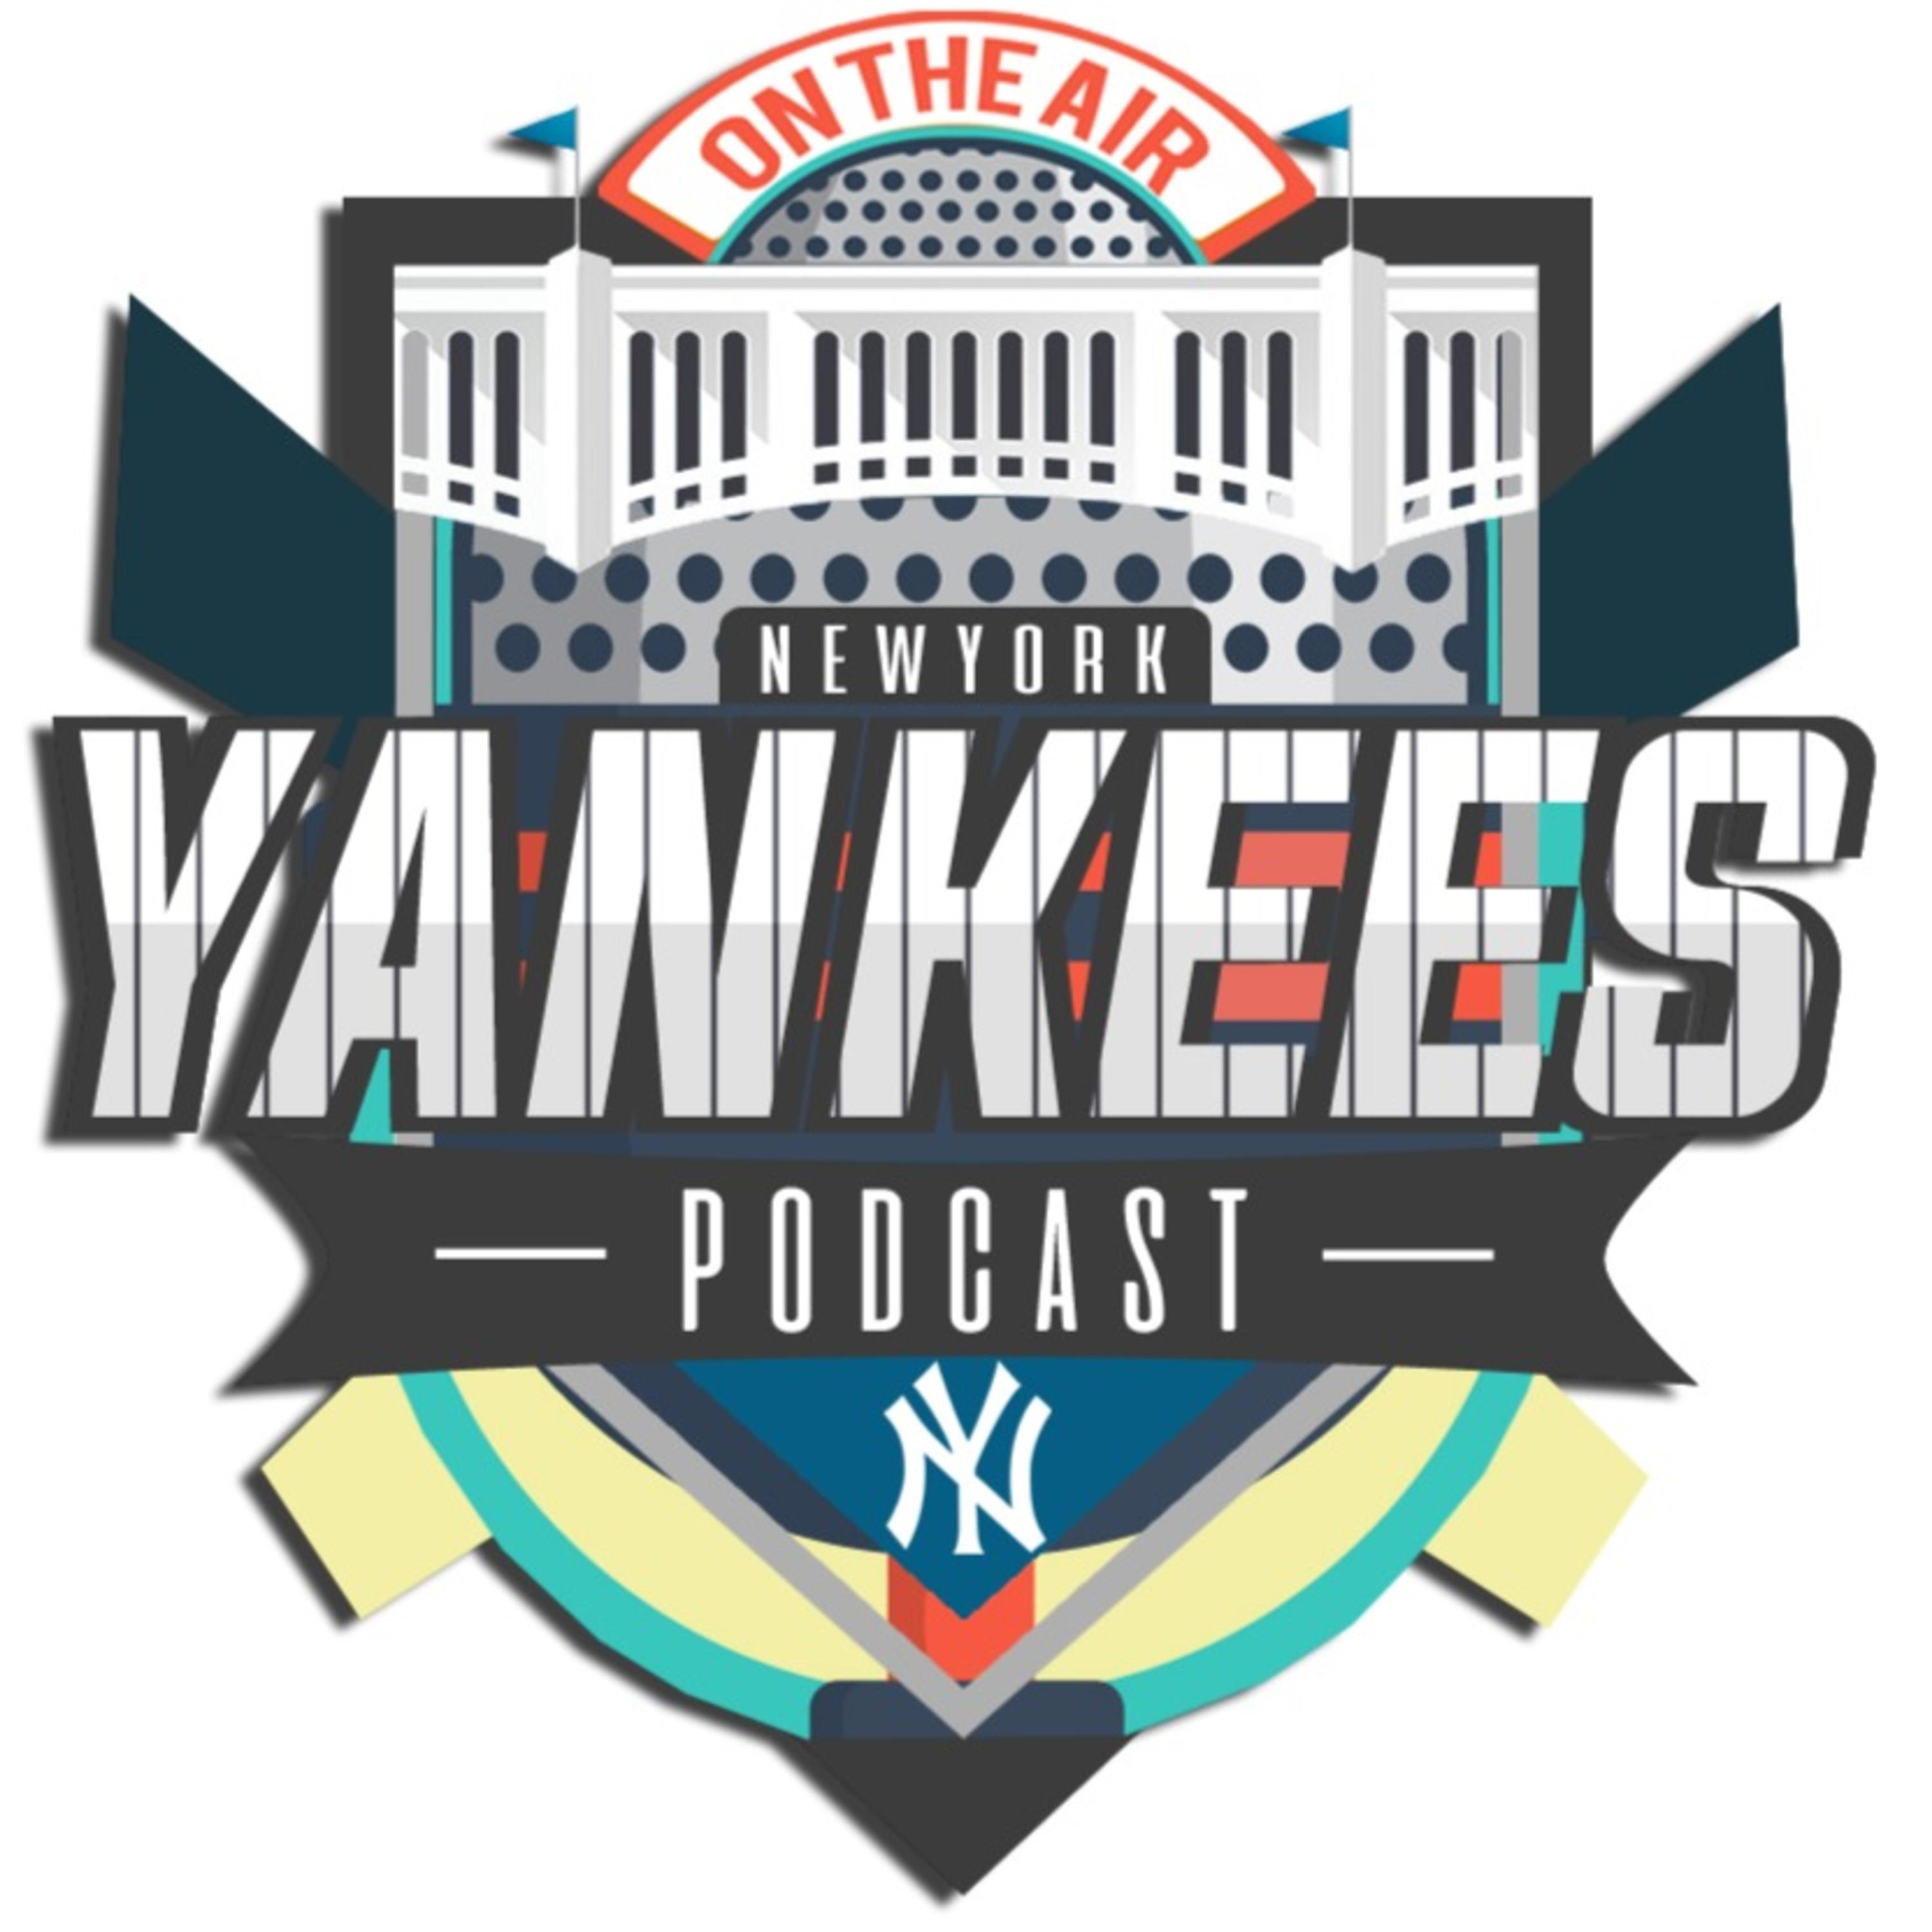 New York Yankees Hungary Podcast - Bé x DS! x Mike - S06E02